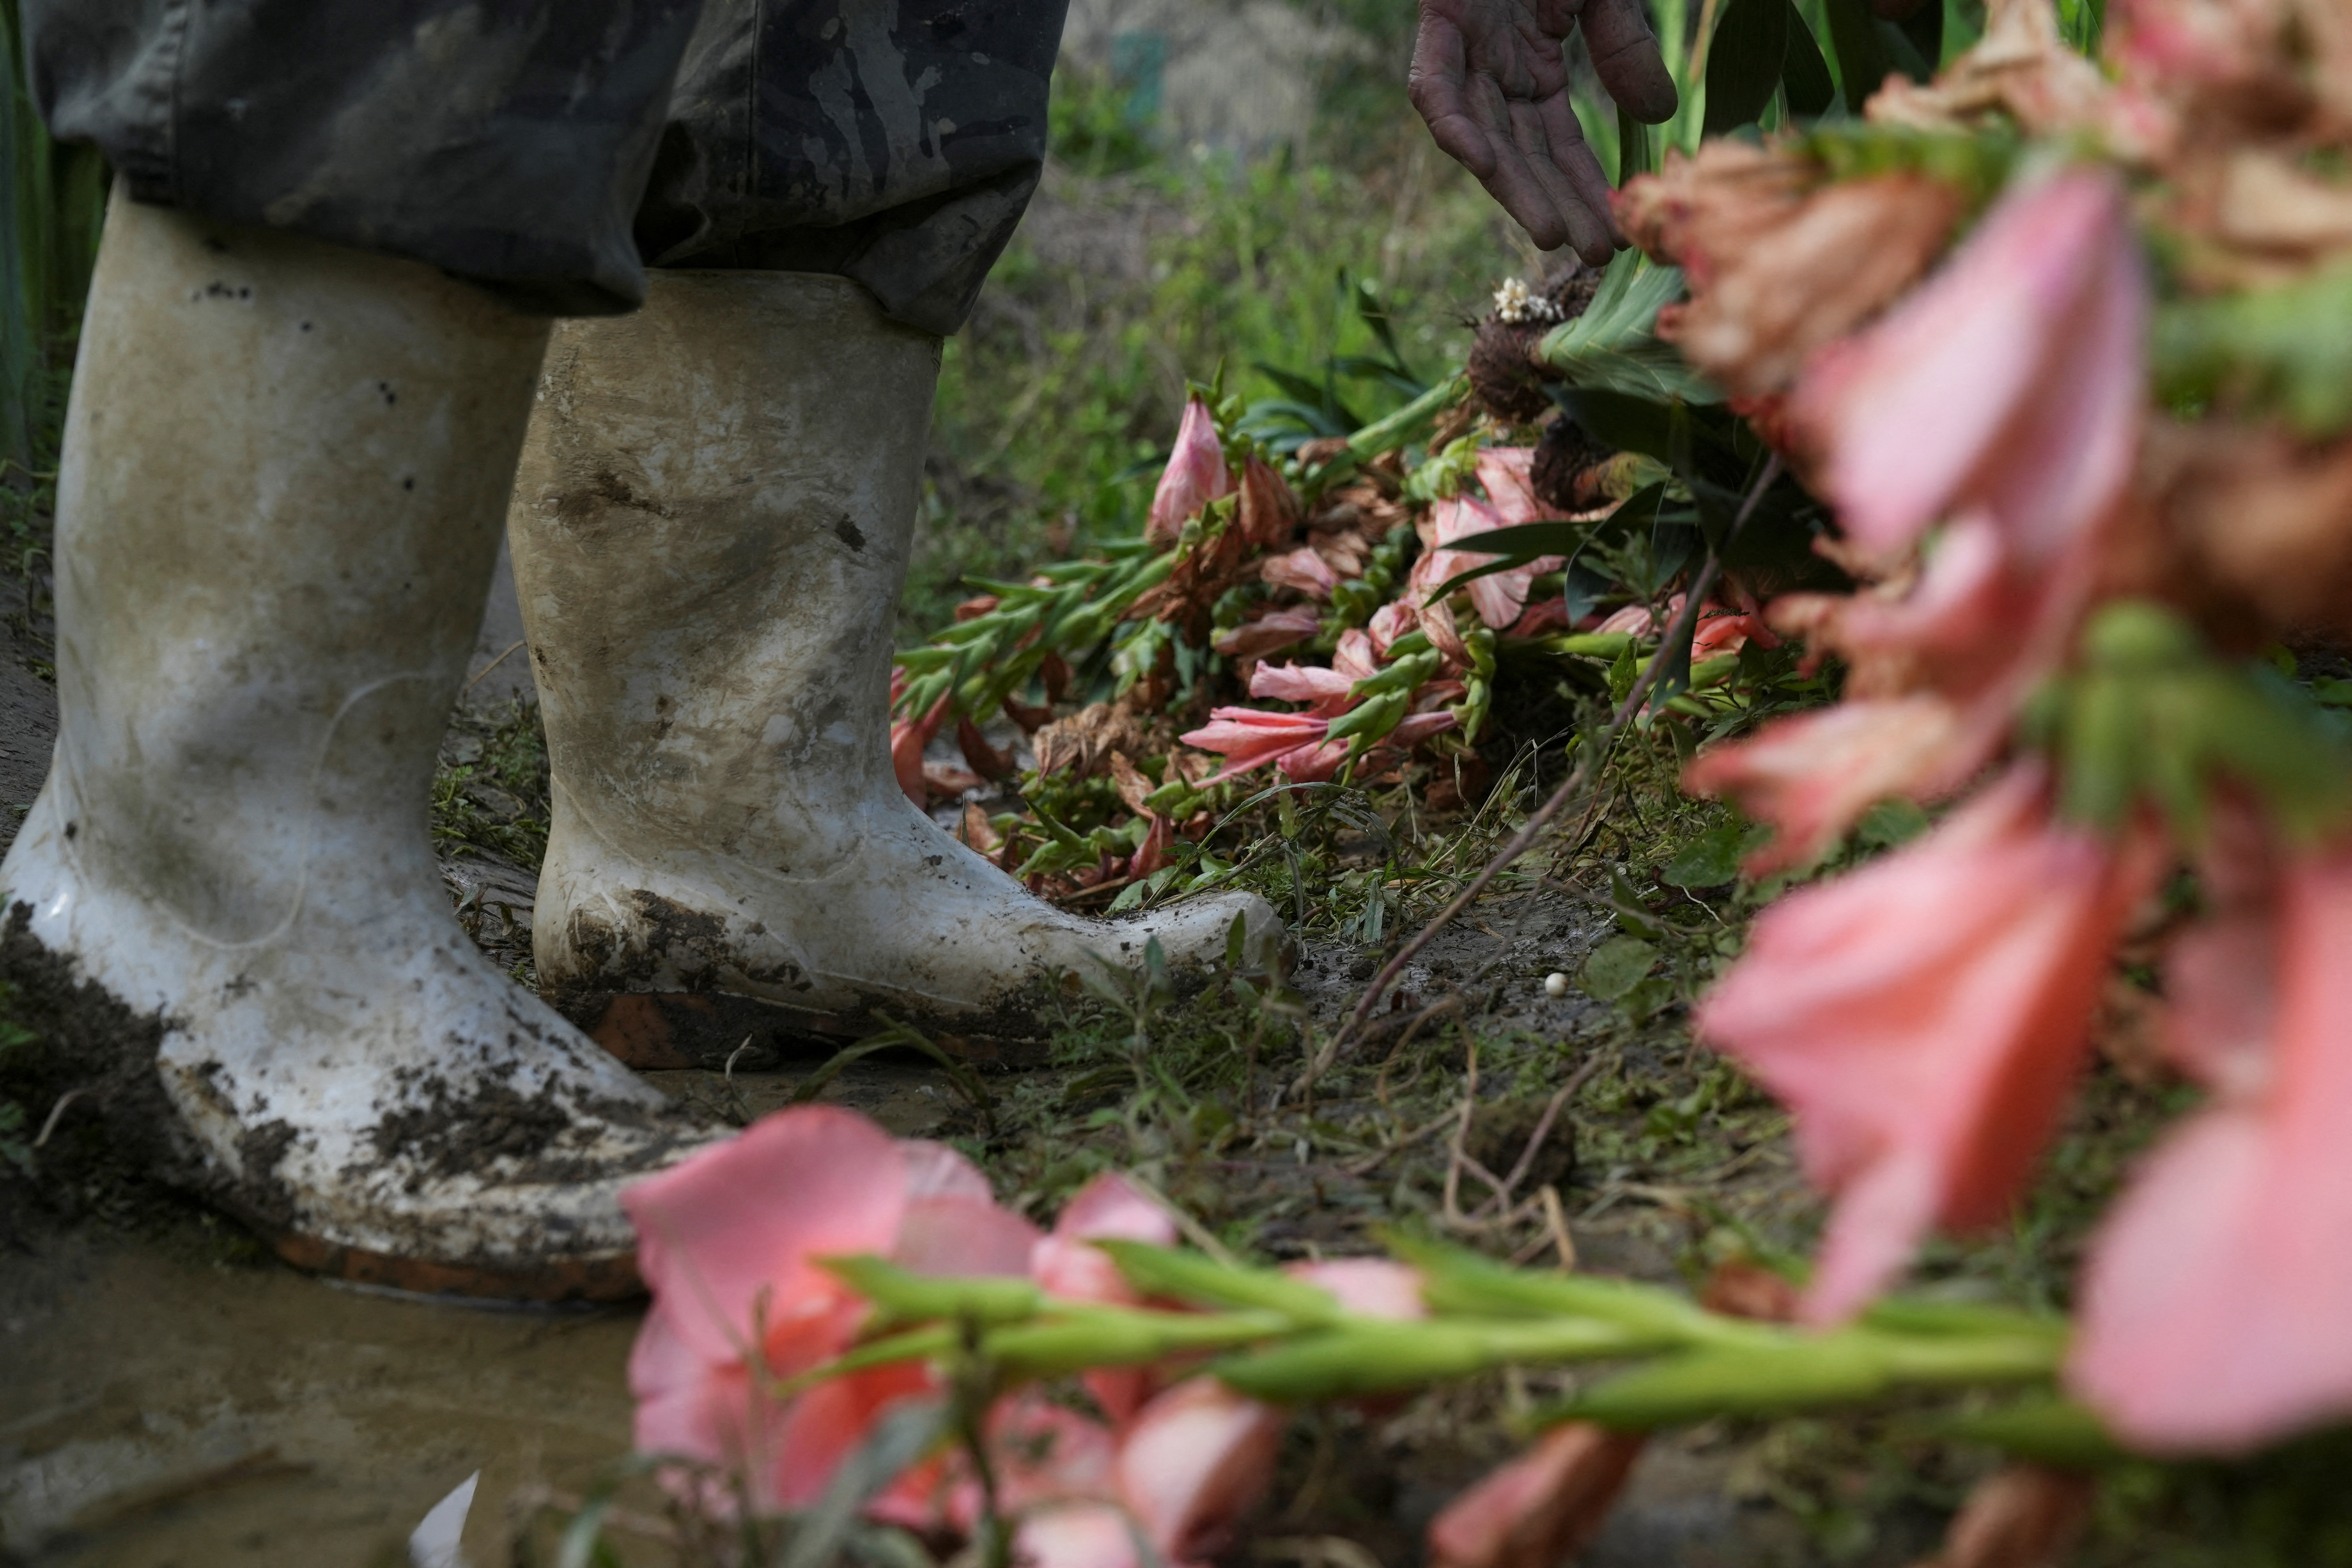 Flower farmer Leung Yat-Shen places flowers on the ground at his farm in Hong Kong